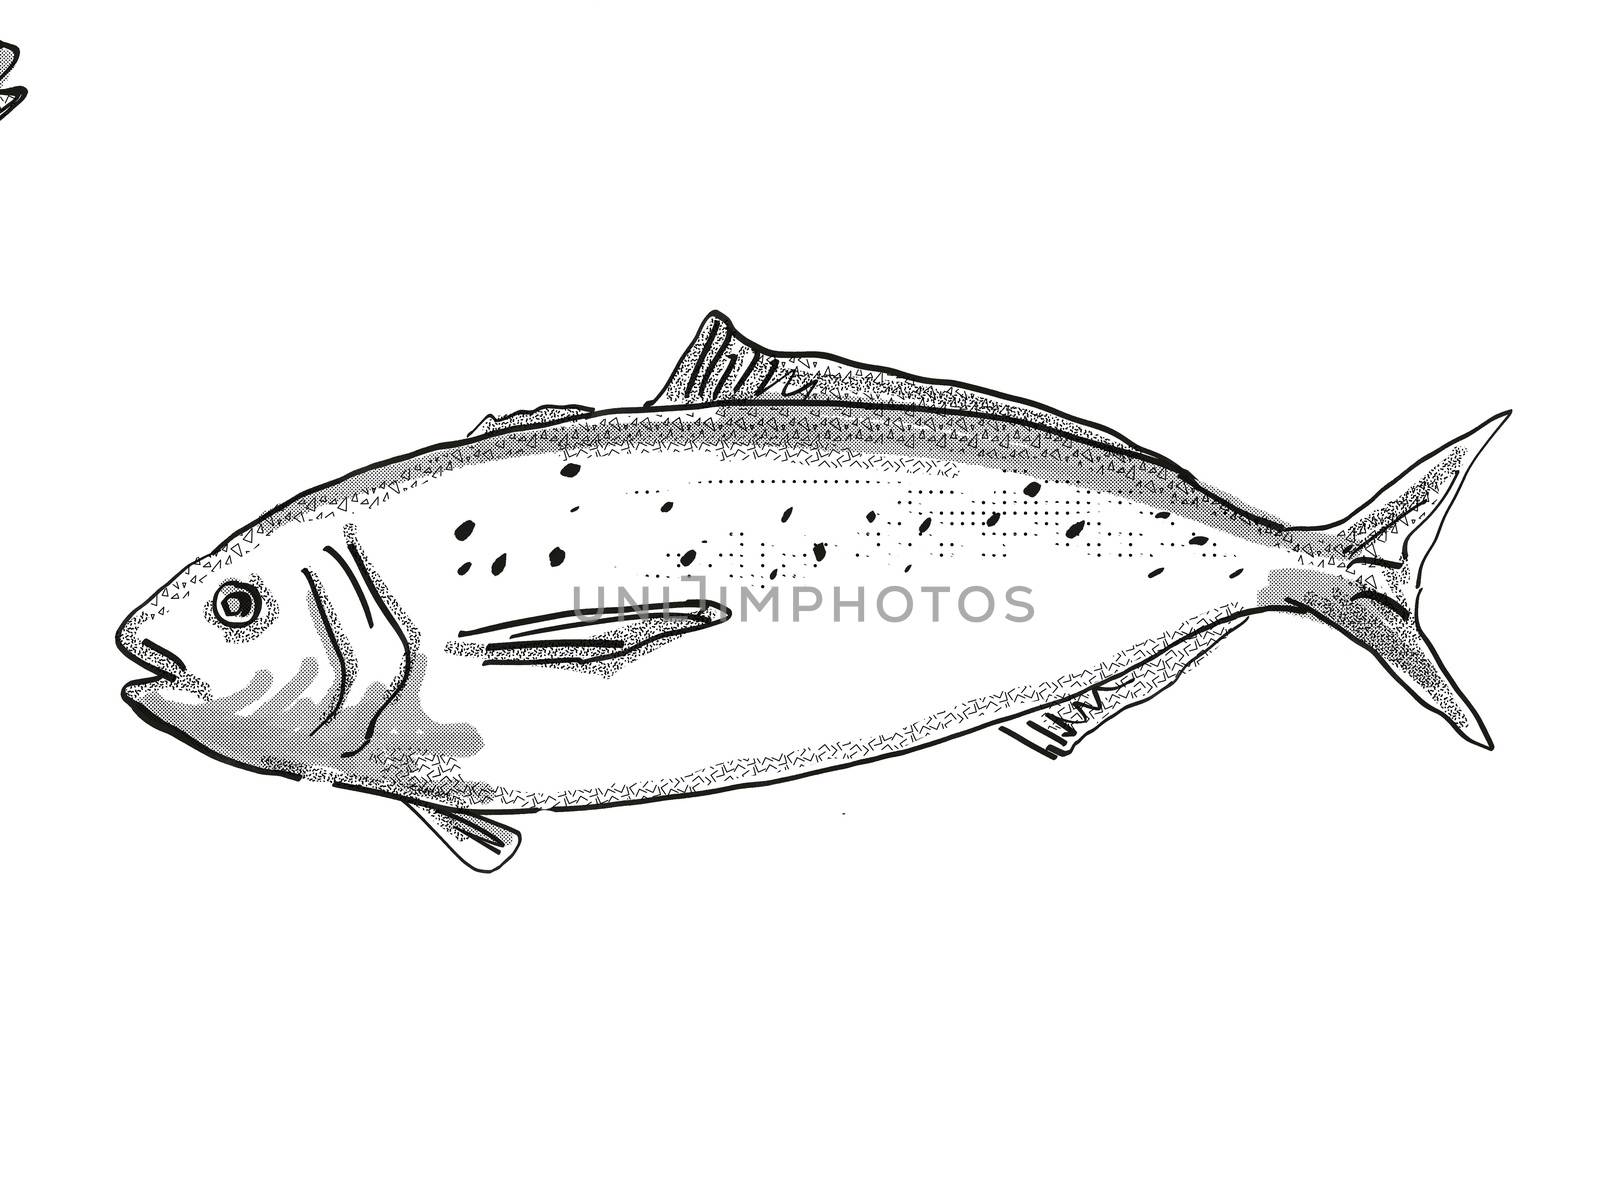 Retro cartoon style drawing of a Blue warehou, a native New Zealand marine life species viewed from side on isolated white background done in black and white